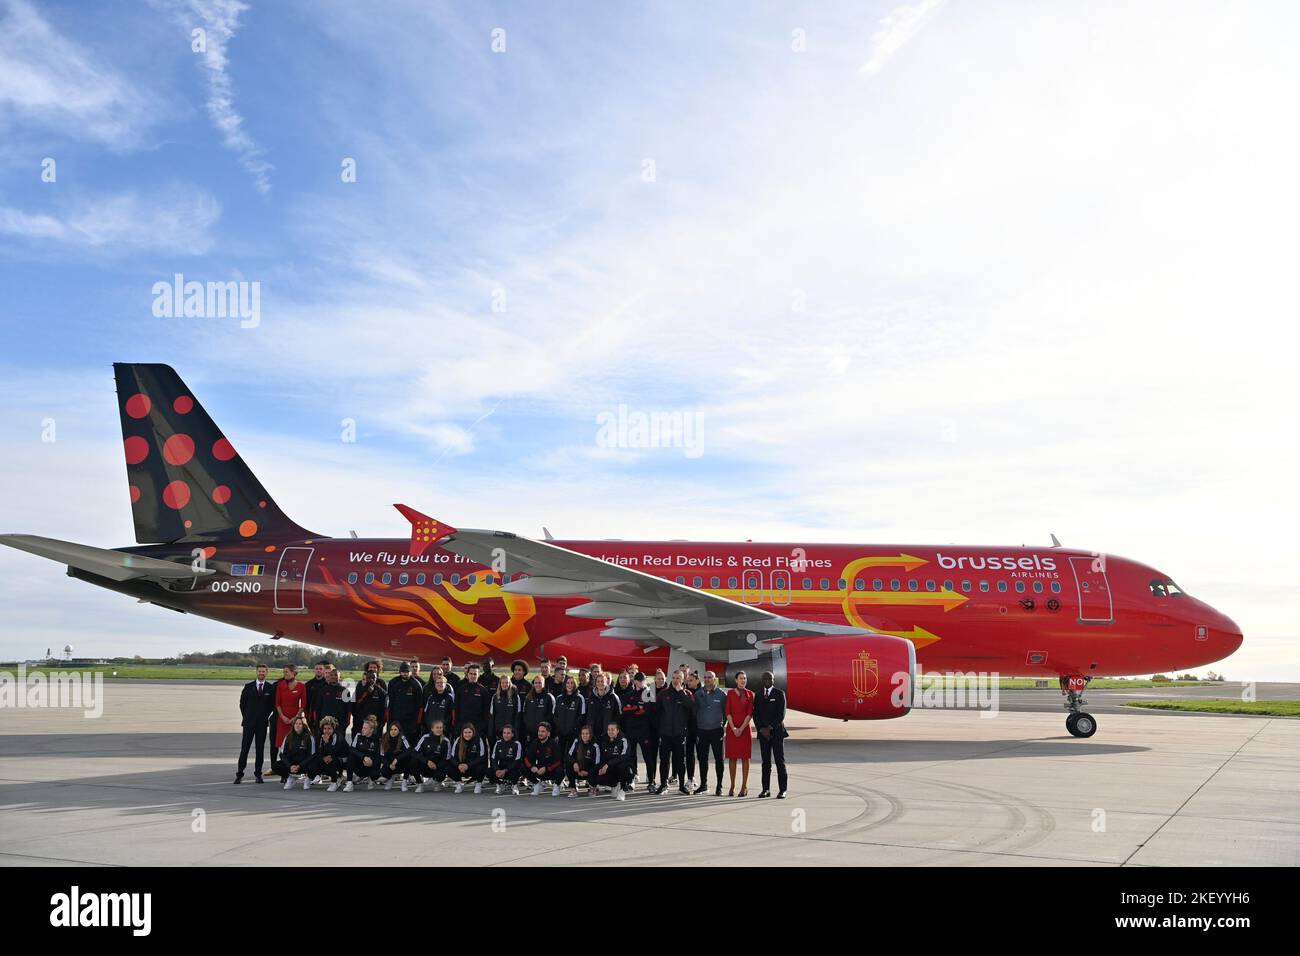 Zaventem. 15 November 2022, Belgium team players pose in front of the plane at the presentation of the new so-called Trident of Brussels Airlines at the departure of Belgian national soccer team the Red Devils from Brussels Airport, Tuesday 15 November 2022, in Zaventem. The Red Devils fly to Kuwait today, for a training camp ahead of the FIFA World Cup 2022. The airplane is painted in special colours for the Belgian national soccer team. BELGA PHOTO ERIC LALMAND Stock Photo